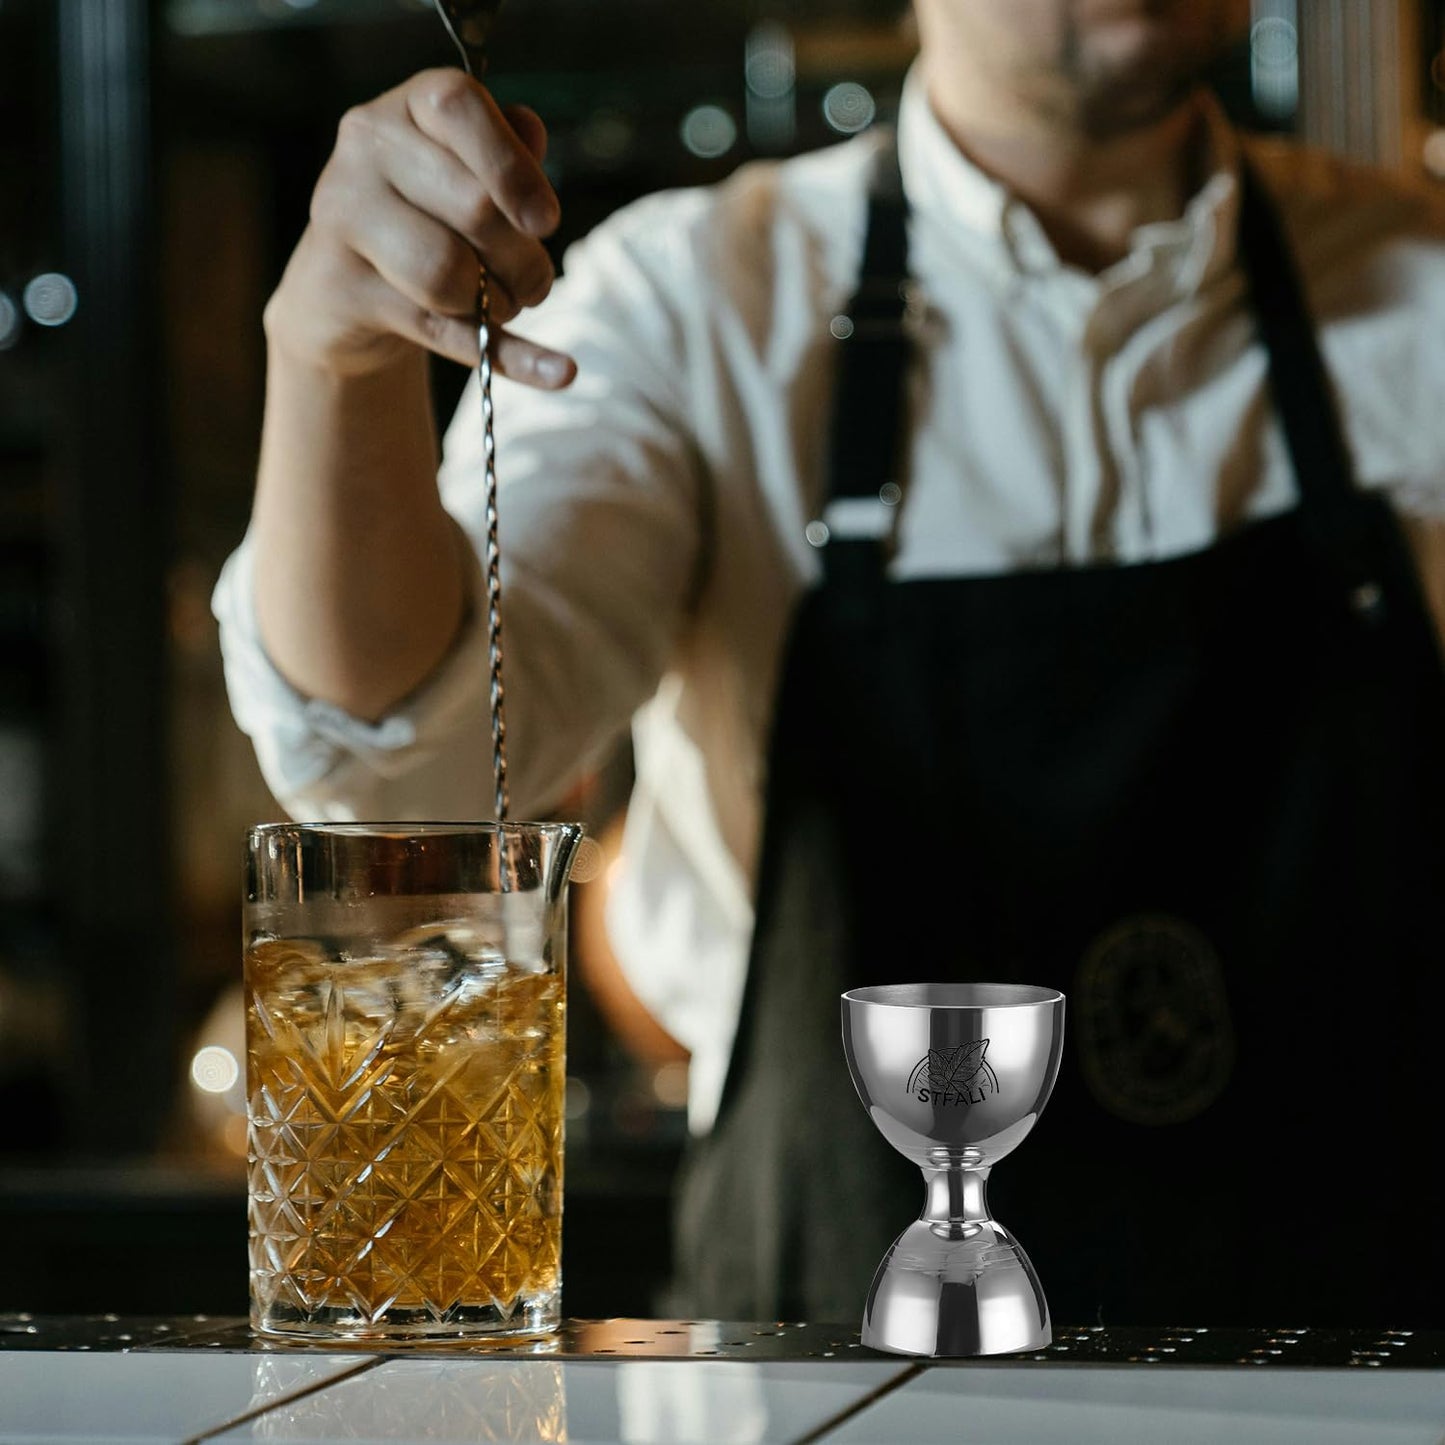 STFALI Cocktail Jigger for Bartending, Jigger with 1/2oz, 1oz, 1 1/2oz and 2oz Measuring Marks, Stainless Steel Bar Tools, Cocktail Measuring Jigger with Cocktail Spoon